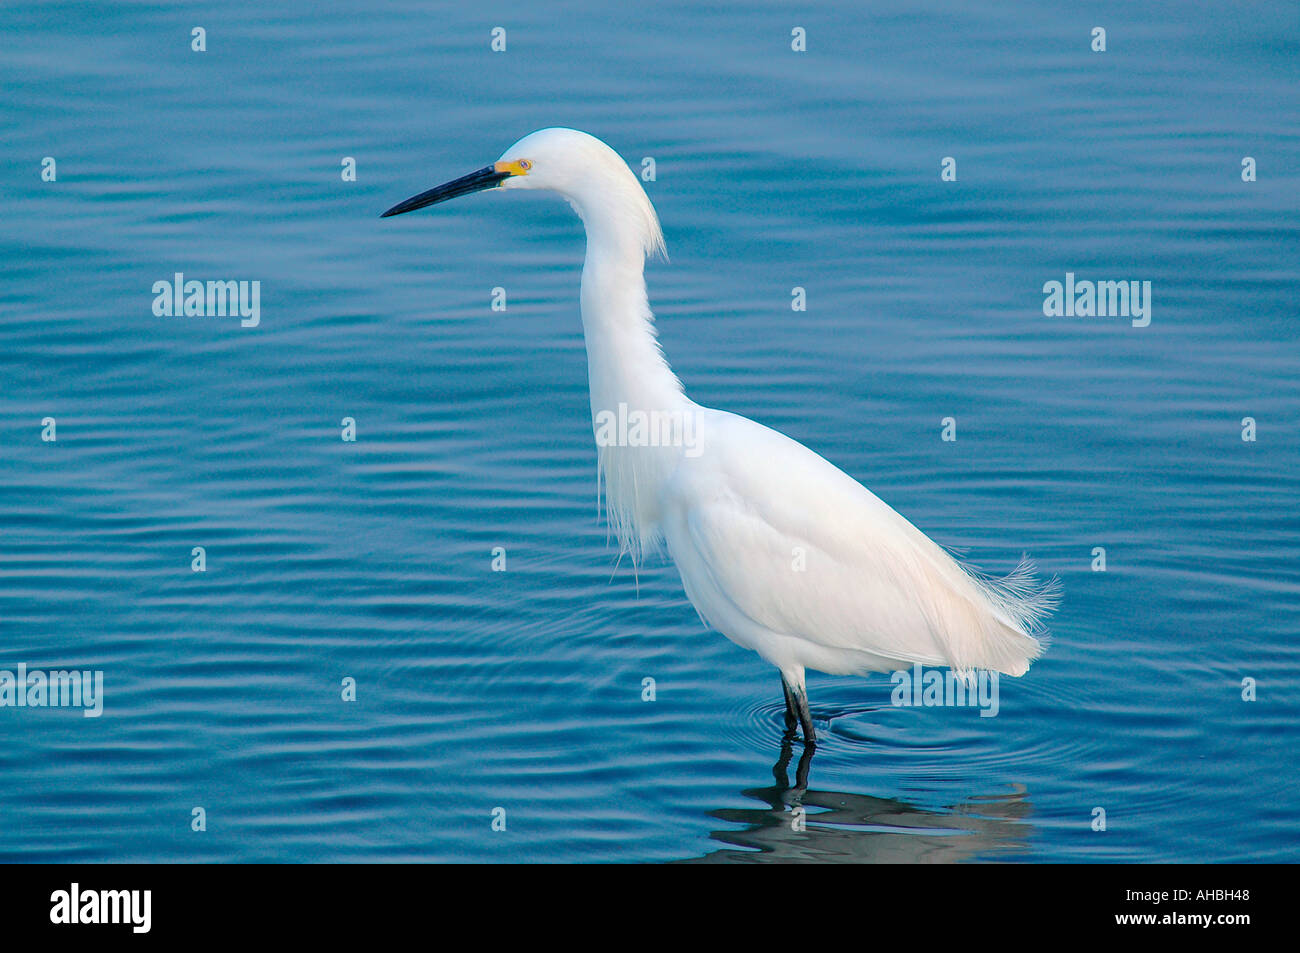 An egret feeds at dusk in the Bolsa Chica bird sanctuary in California Stock Photo